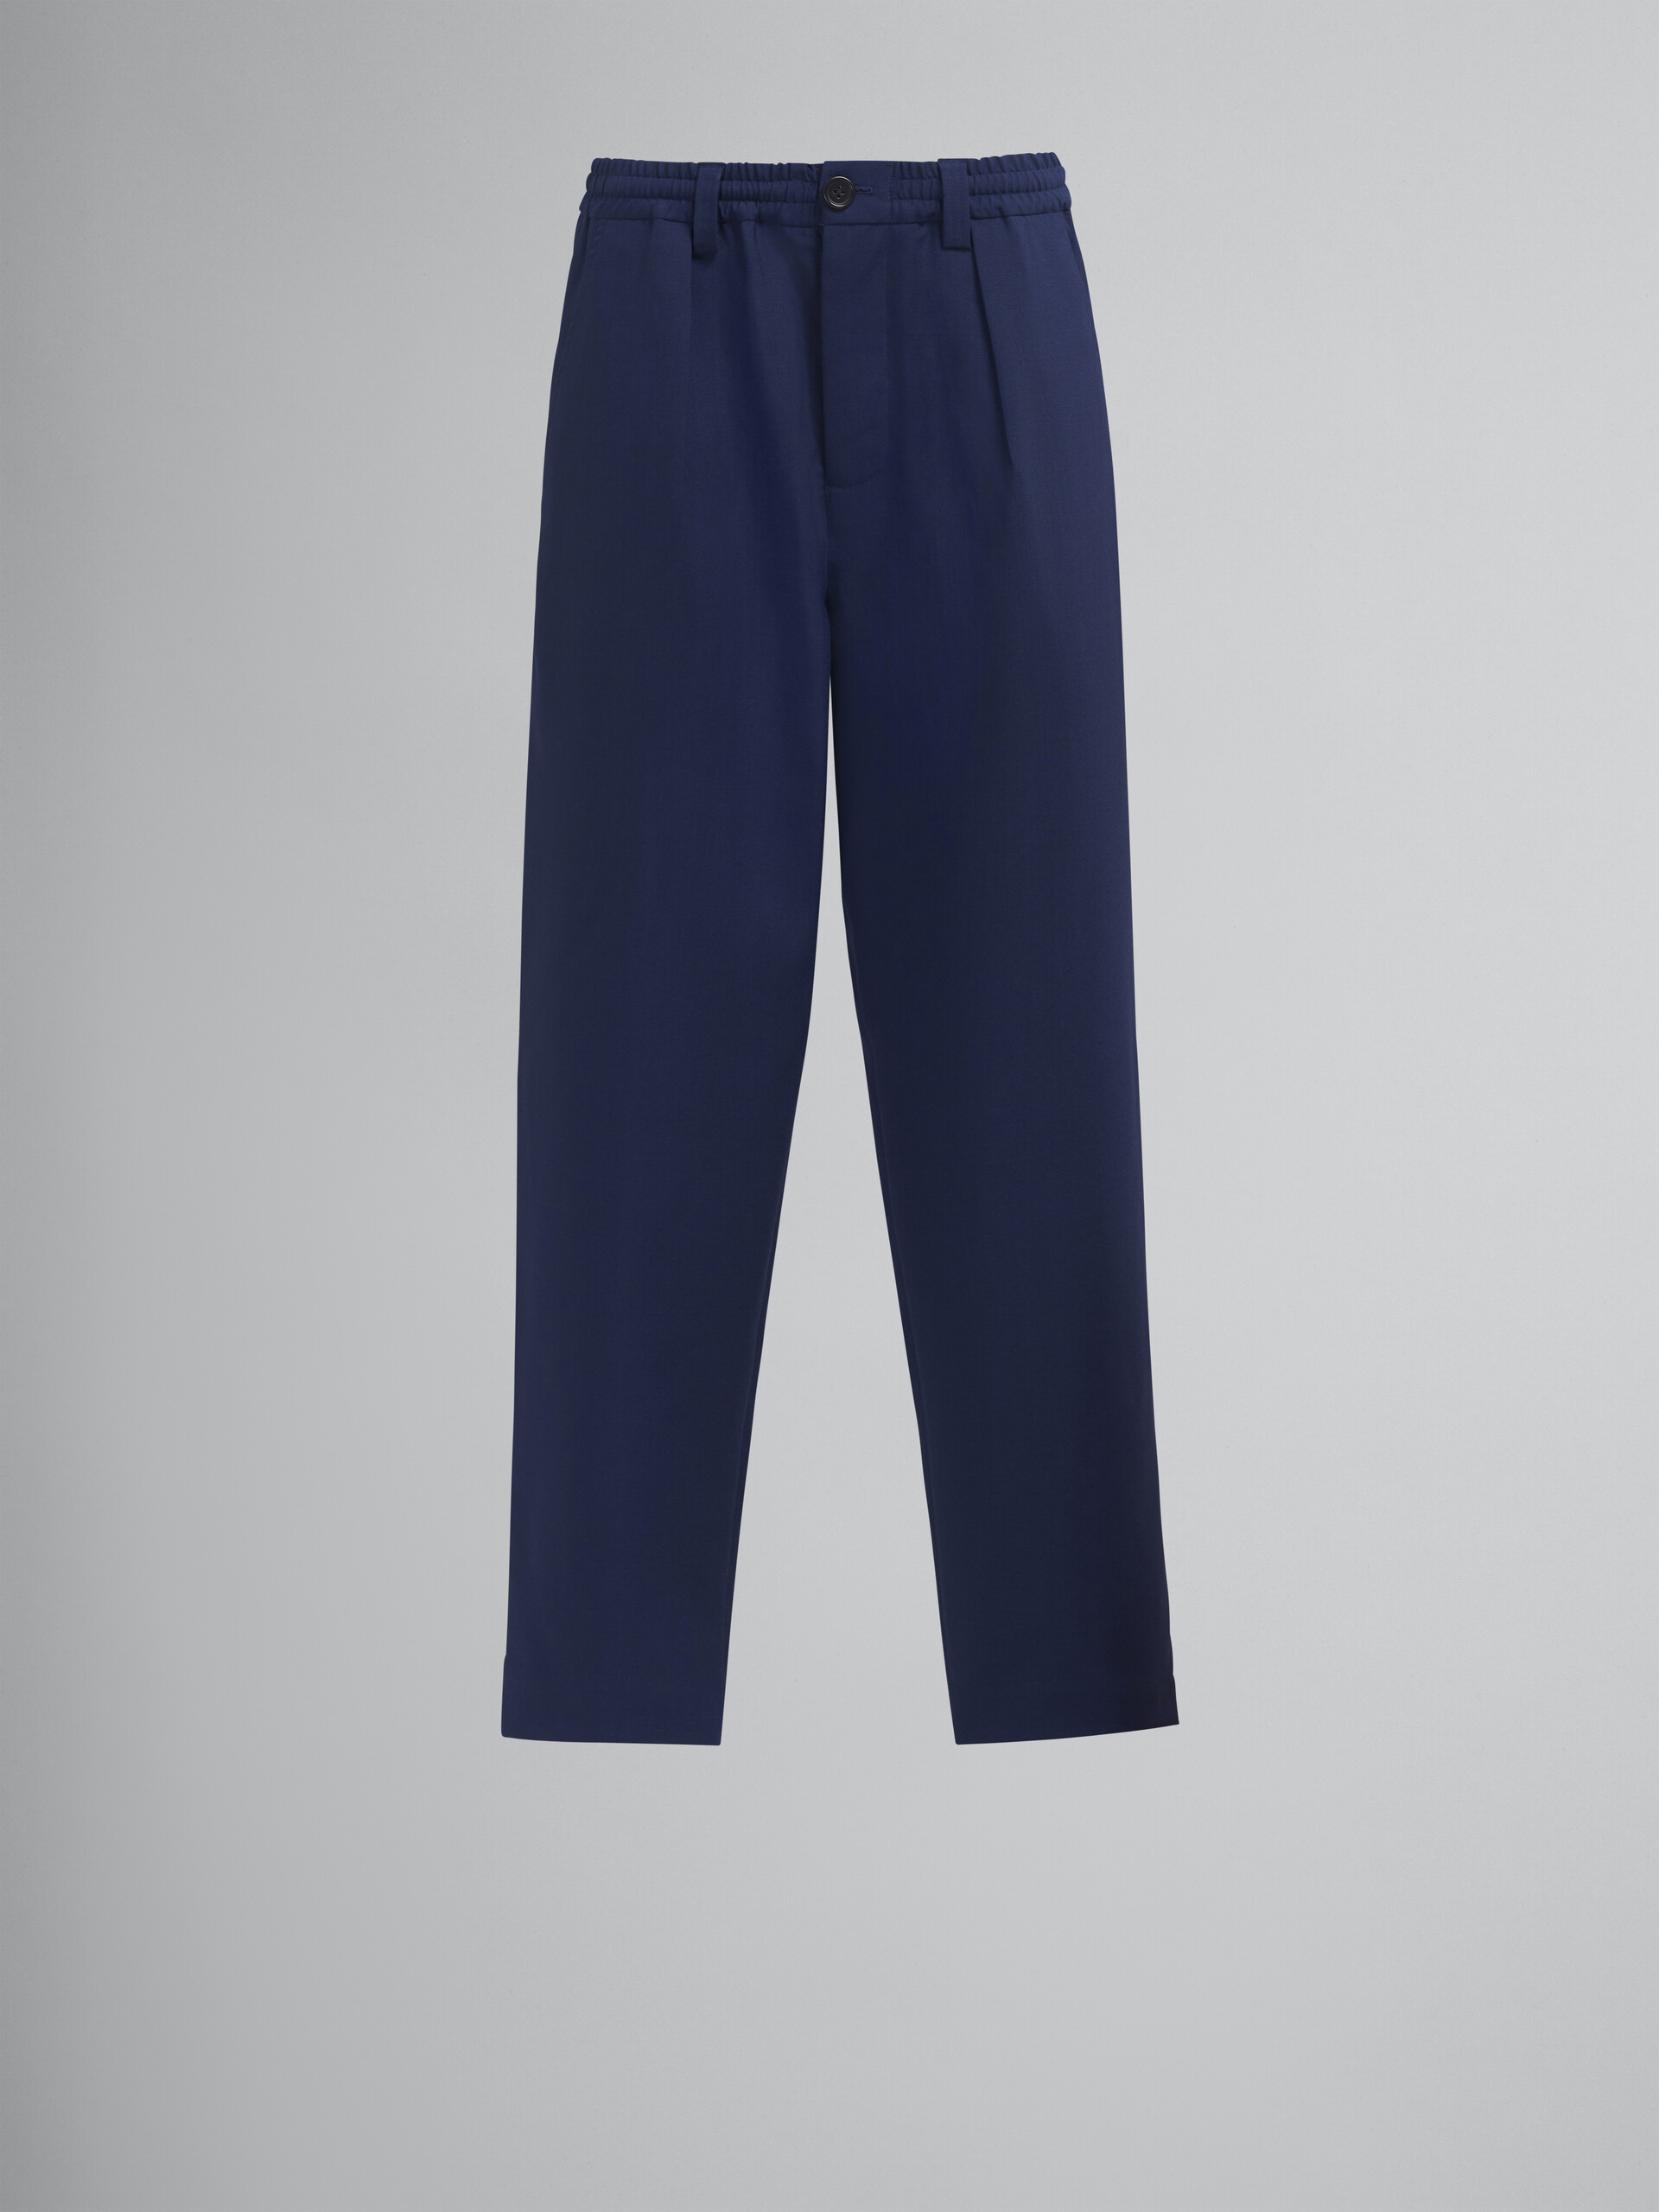 Blue tropical wool trousers - Pants - Image 1